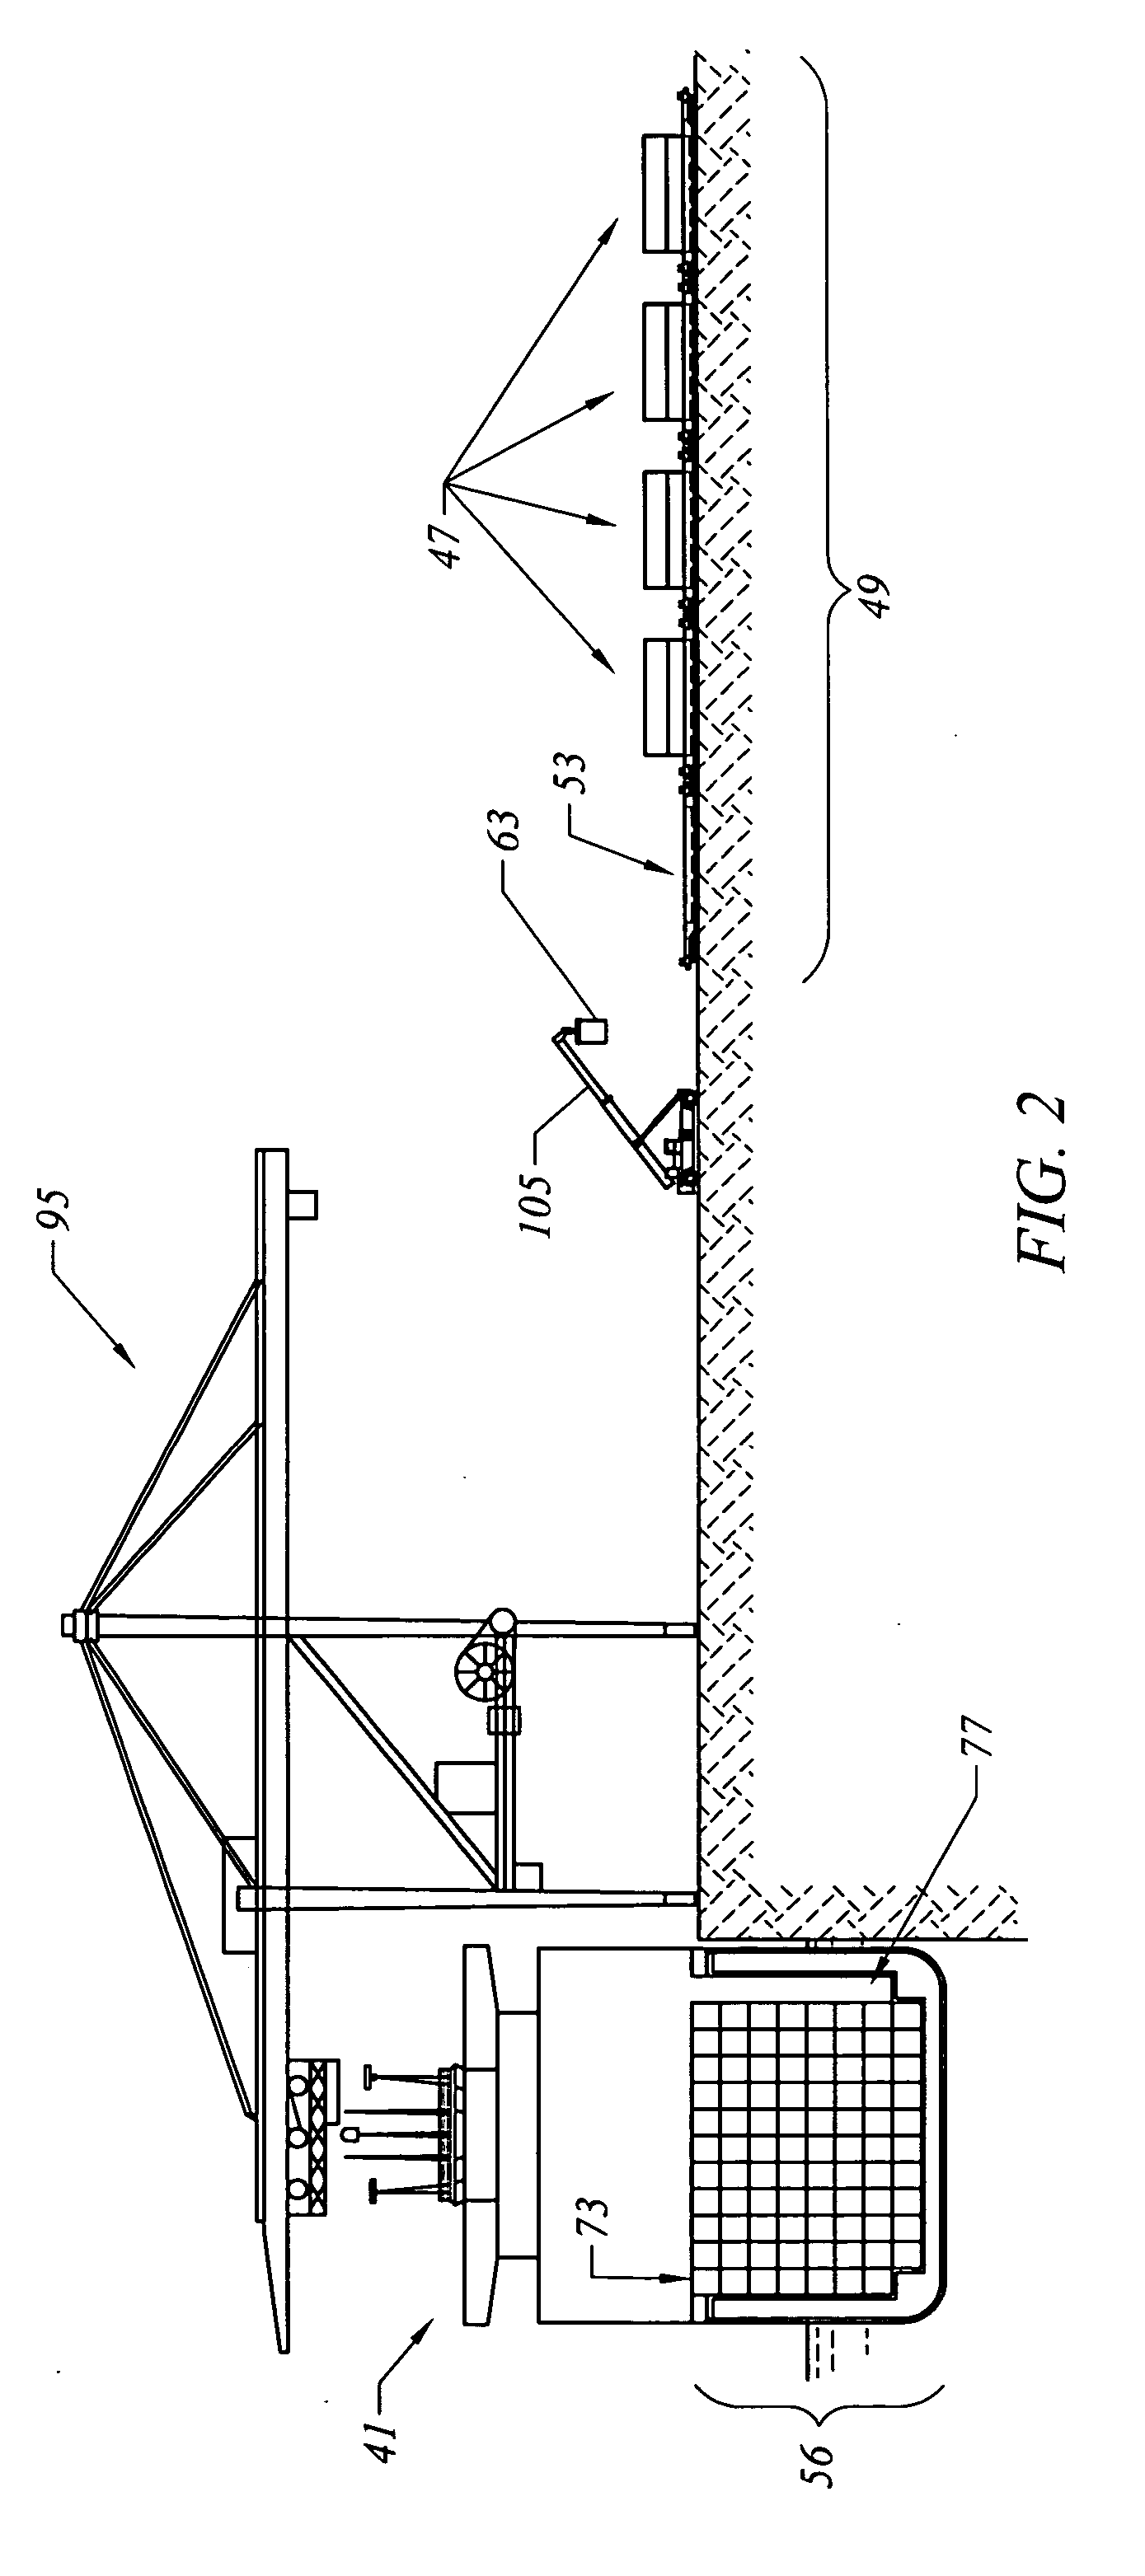 Buffered magazine method and system for loading and unloading ships